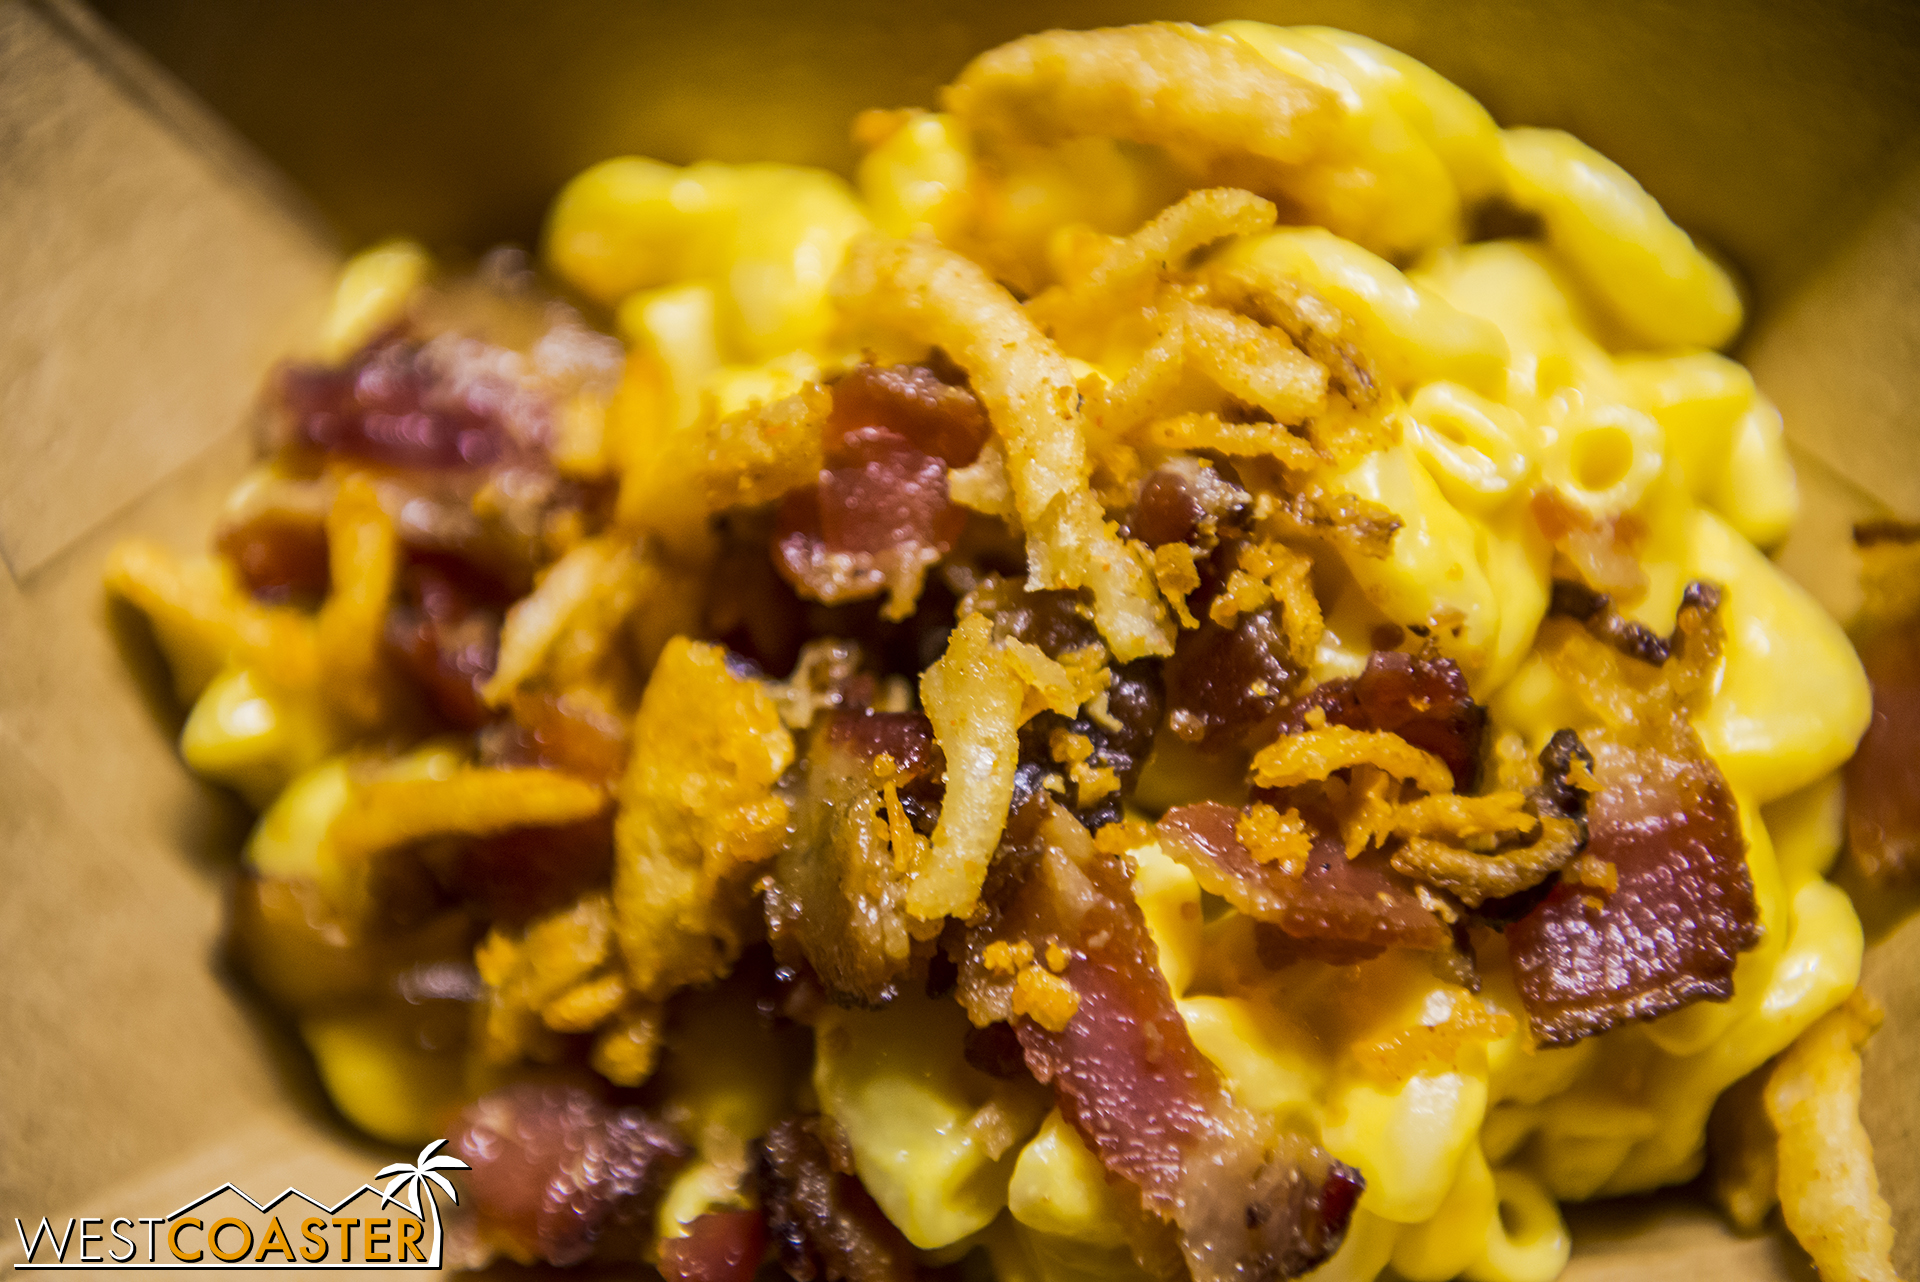  Bacon Mac n Cheese from the Bacon Twist booth.&nbsp; Honestly, the French Onion Mac n Cheese from The Onion Lair is significantly better.&nbsp; This pains me to say admit, given the bacon content of this dish! 